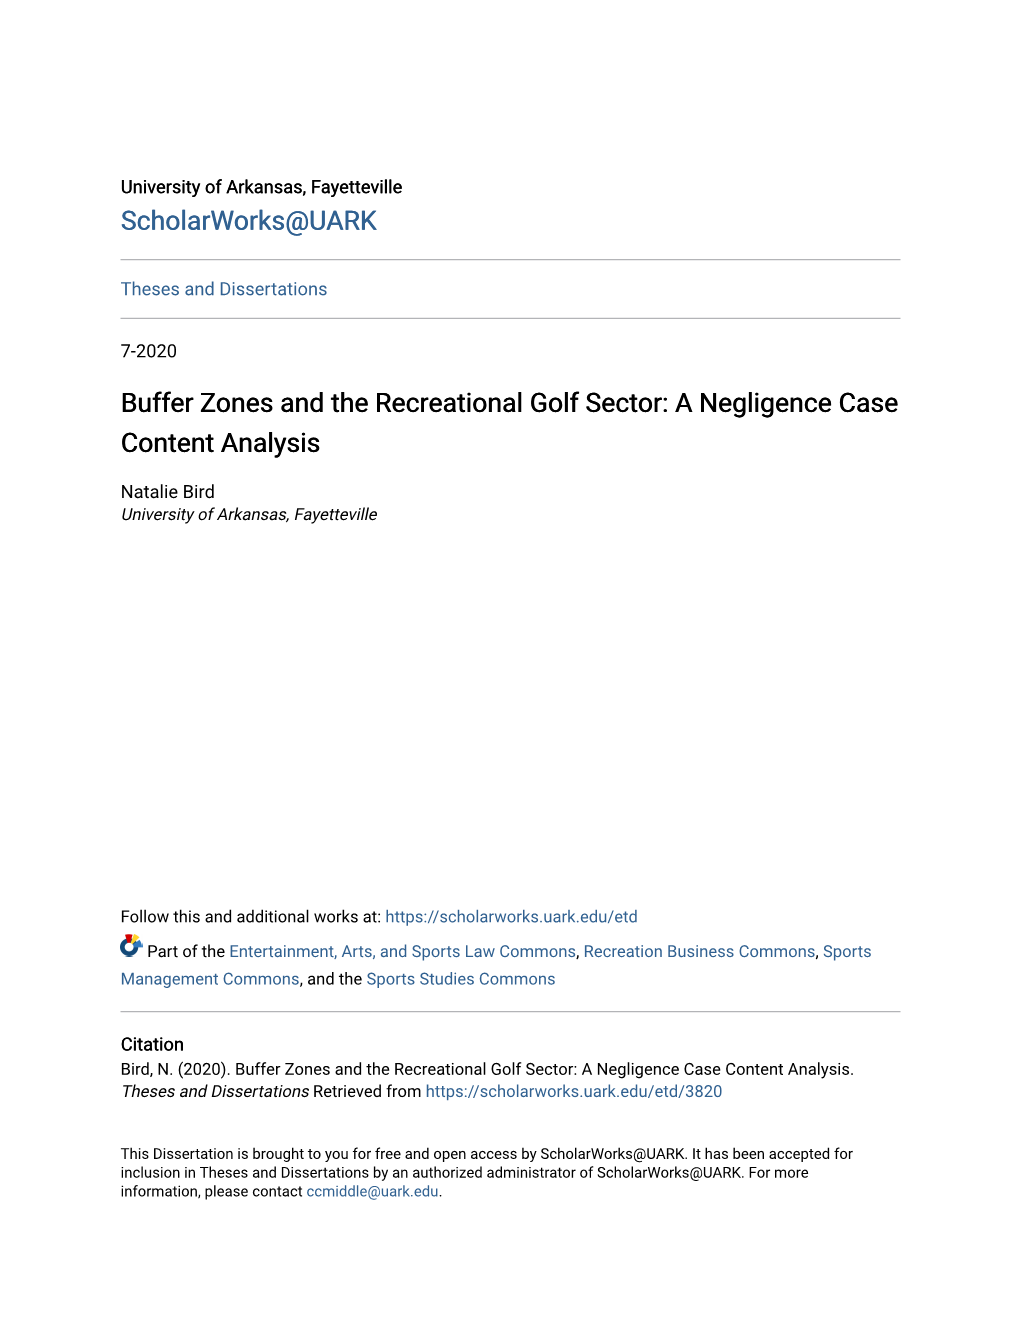 Buffer Zones and the Recreational Golf Sector: a Negligence Case Content Analysis